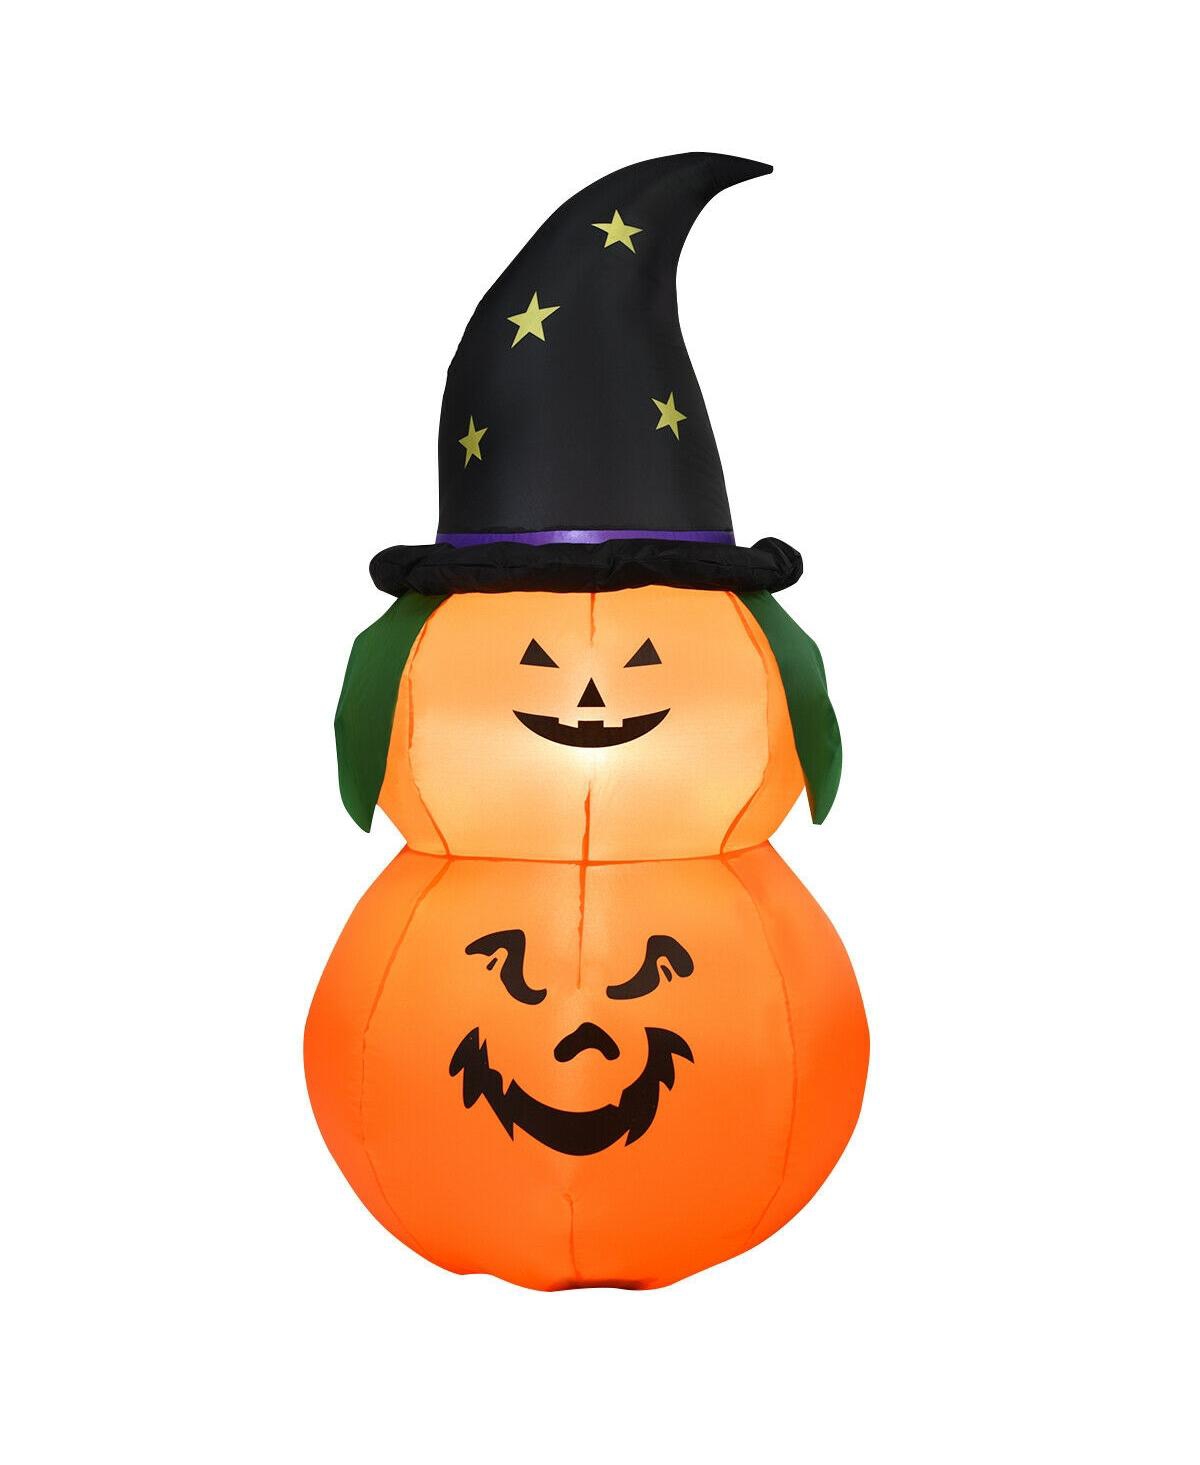 5 Feet Halloween Inflatable Led Pumpkin with Witch Hat - Orange